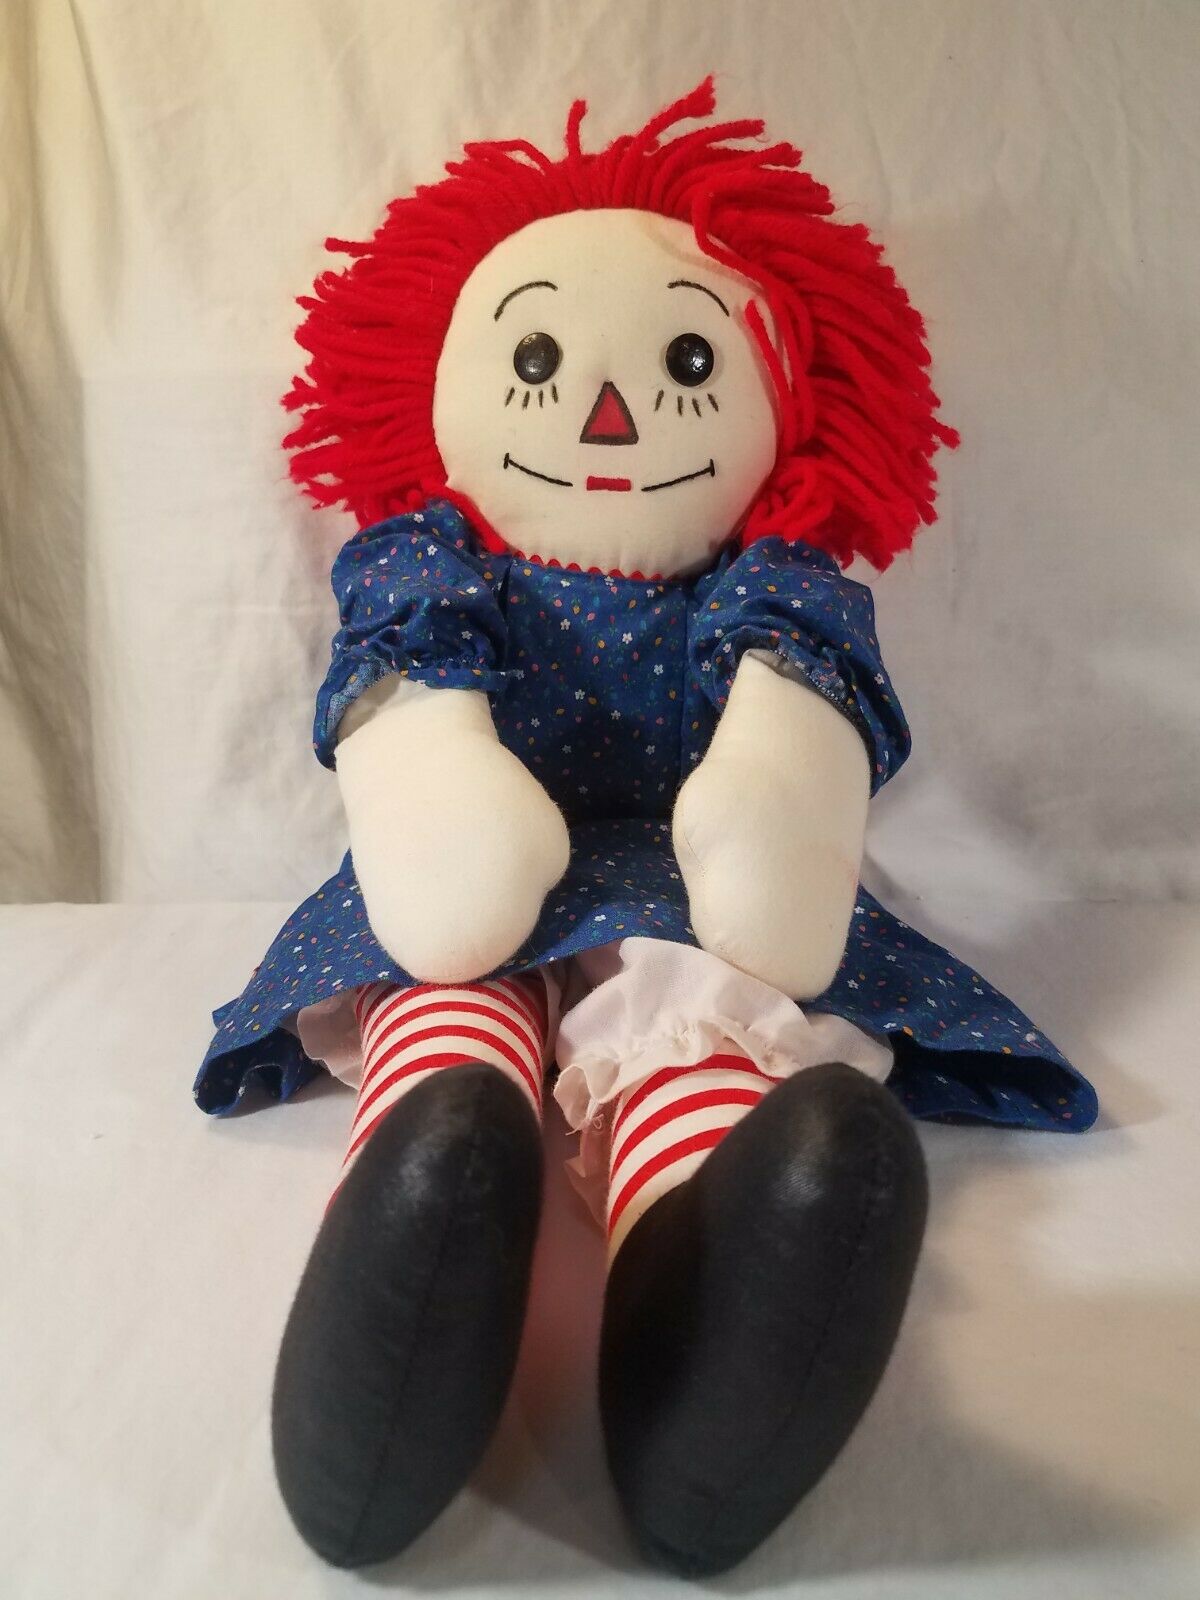 Beautifully Handmade Raggedy Ann Doll - Unmistakable Red Hair And Blue Dress